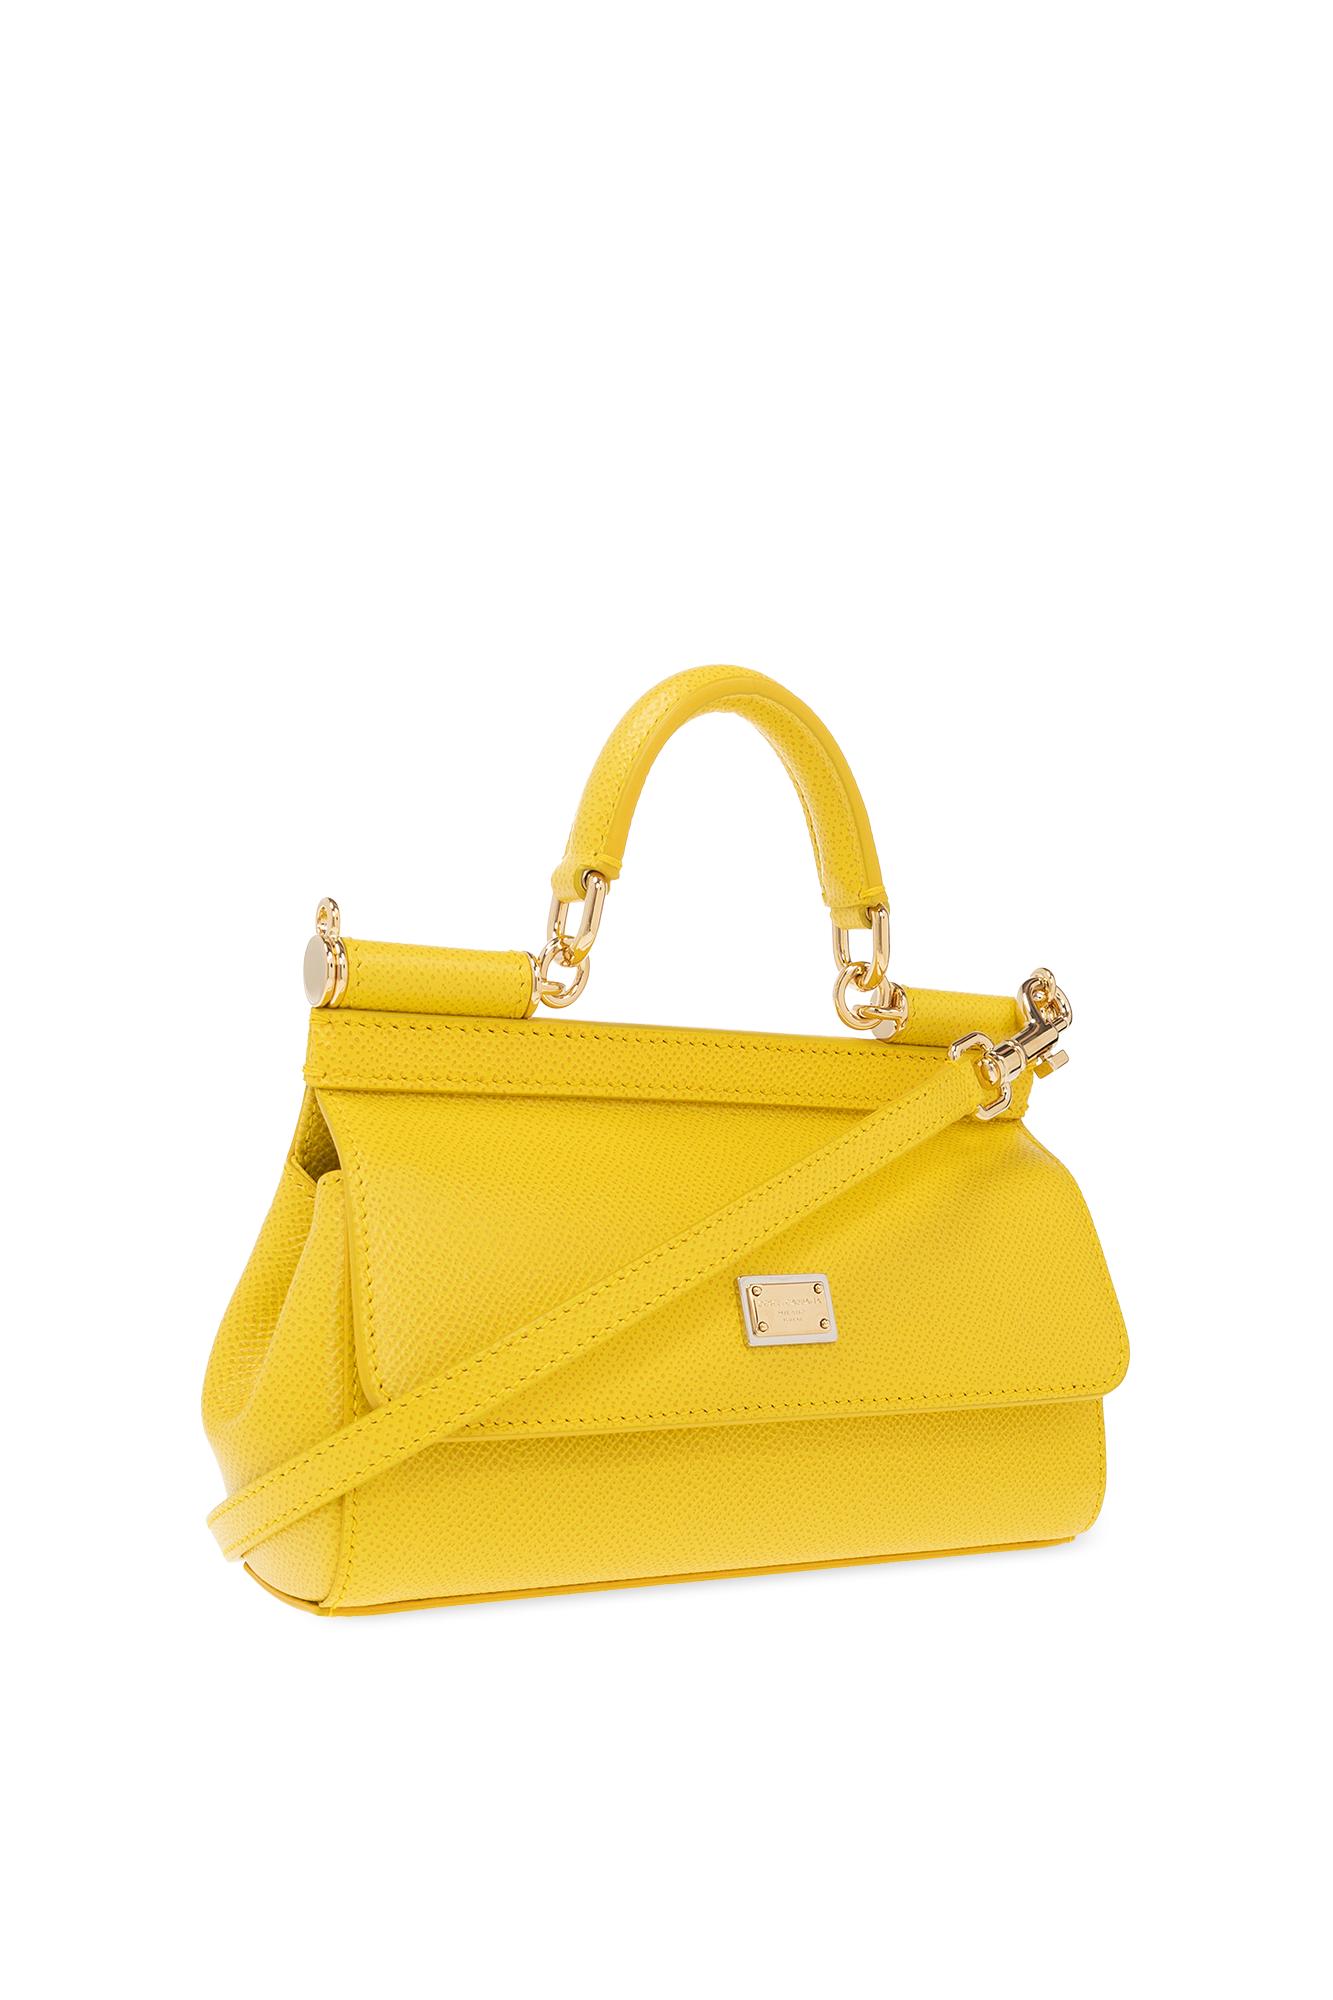 Dolce & Gabbana 'sicily Small' Shoulder Bag in Yellow